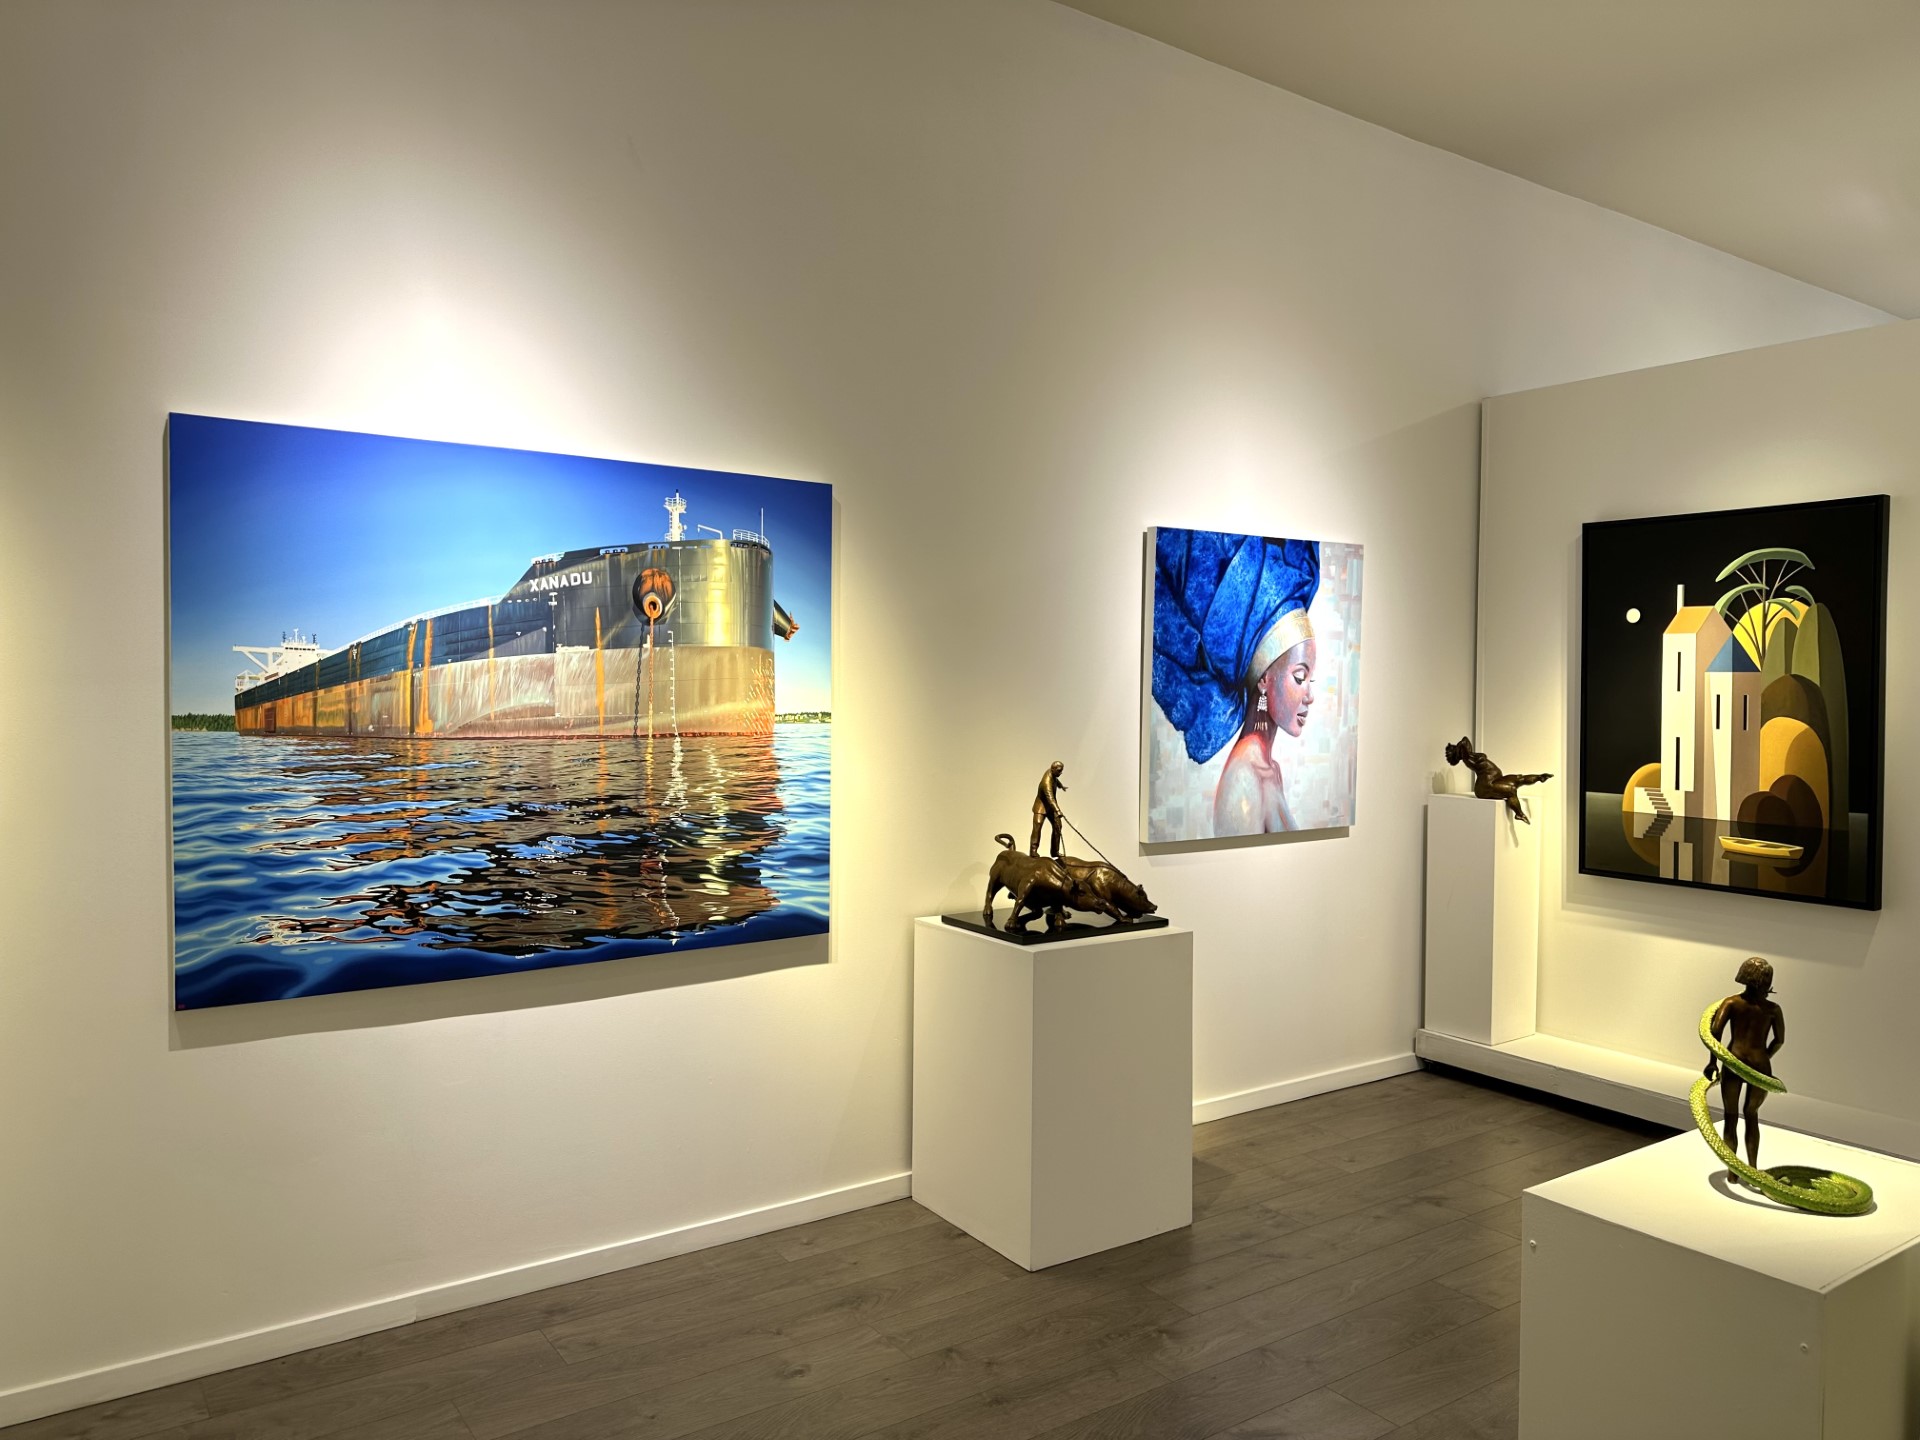 The Best Art Gallery in Vancouver